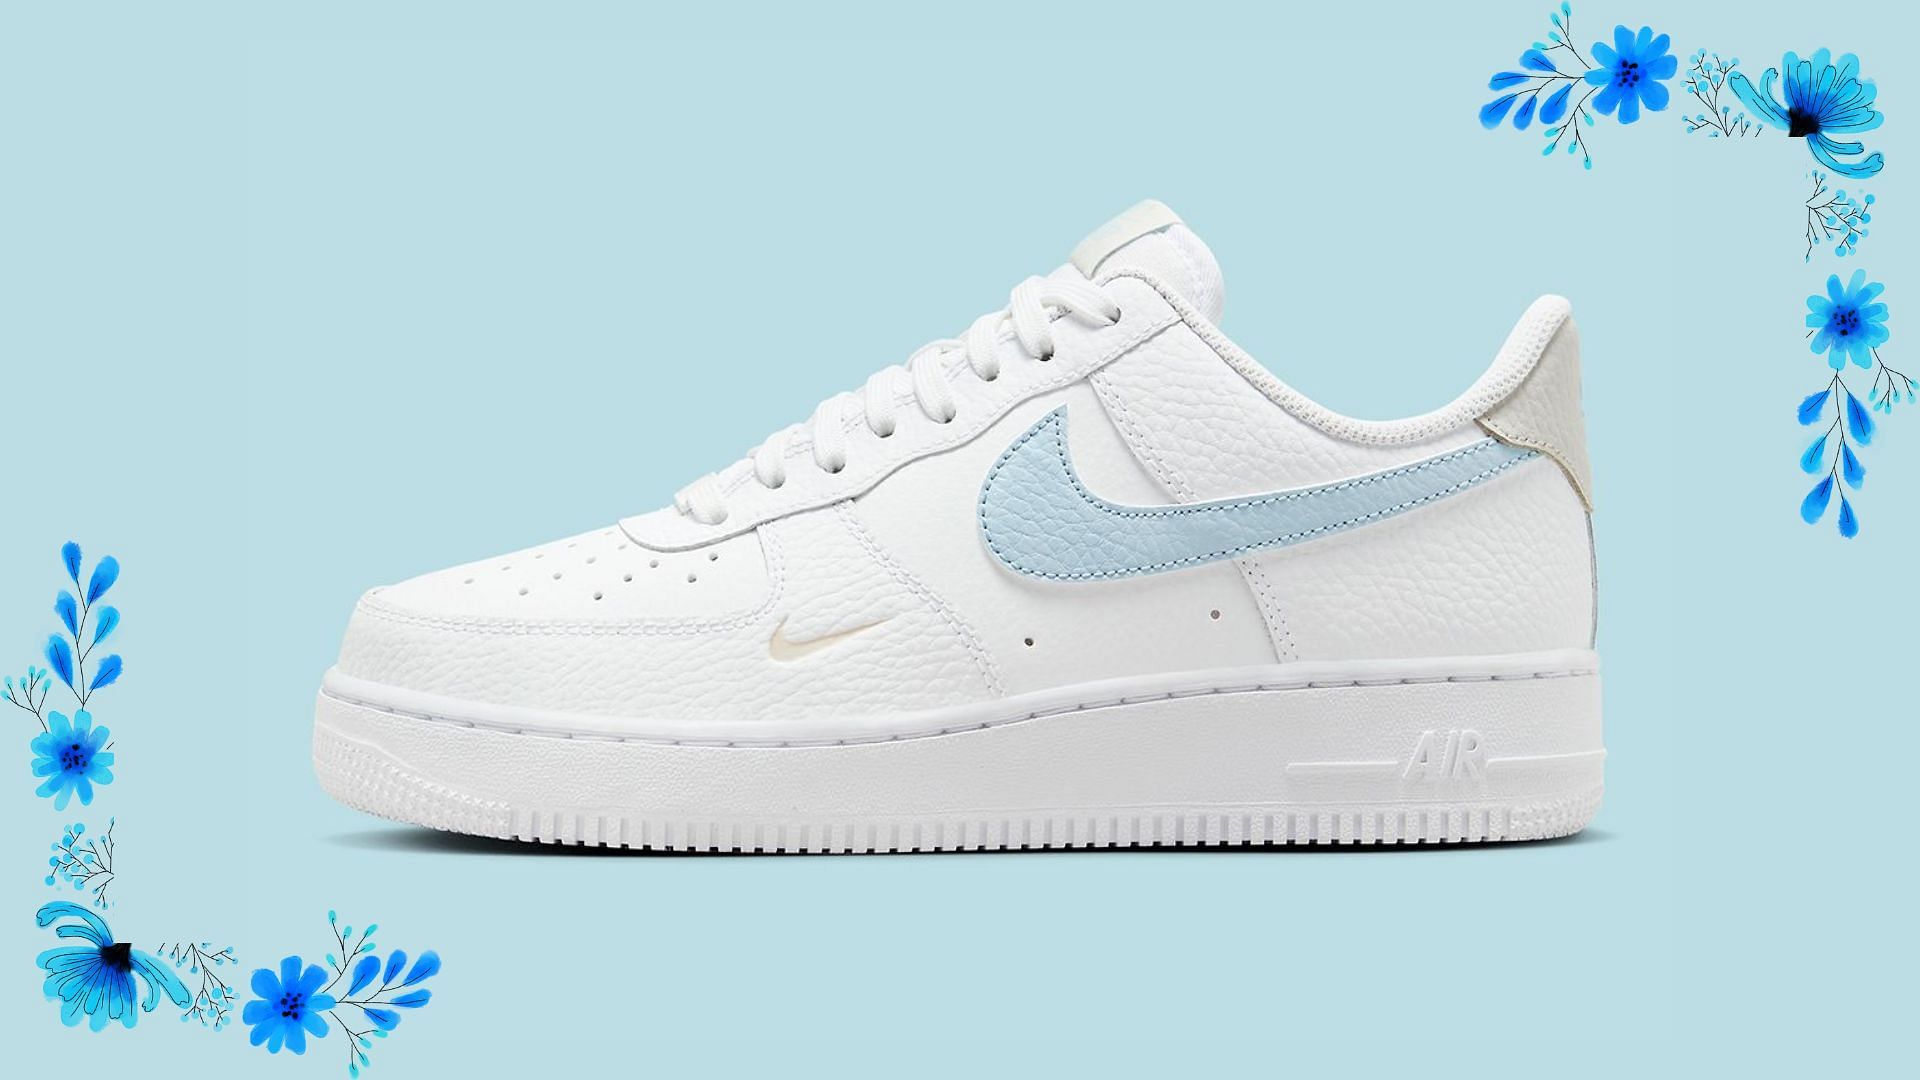 Nike: Nike Air Force 1 Low “White/Armory Blue” shoes: Where to get